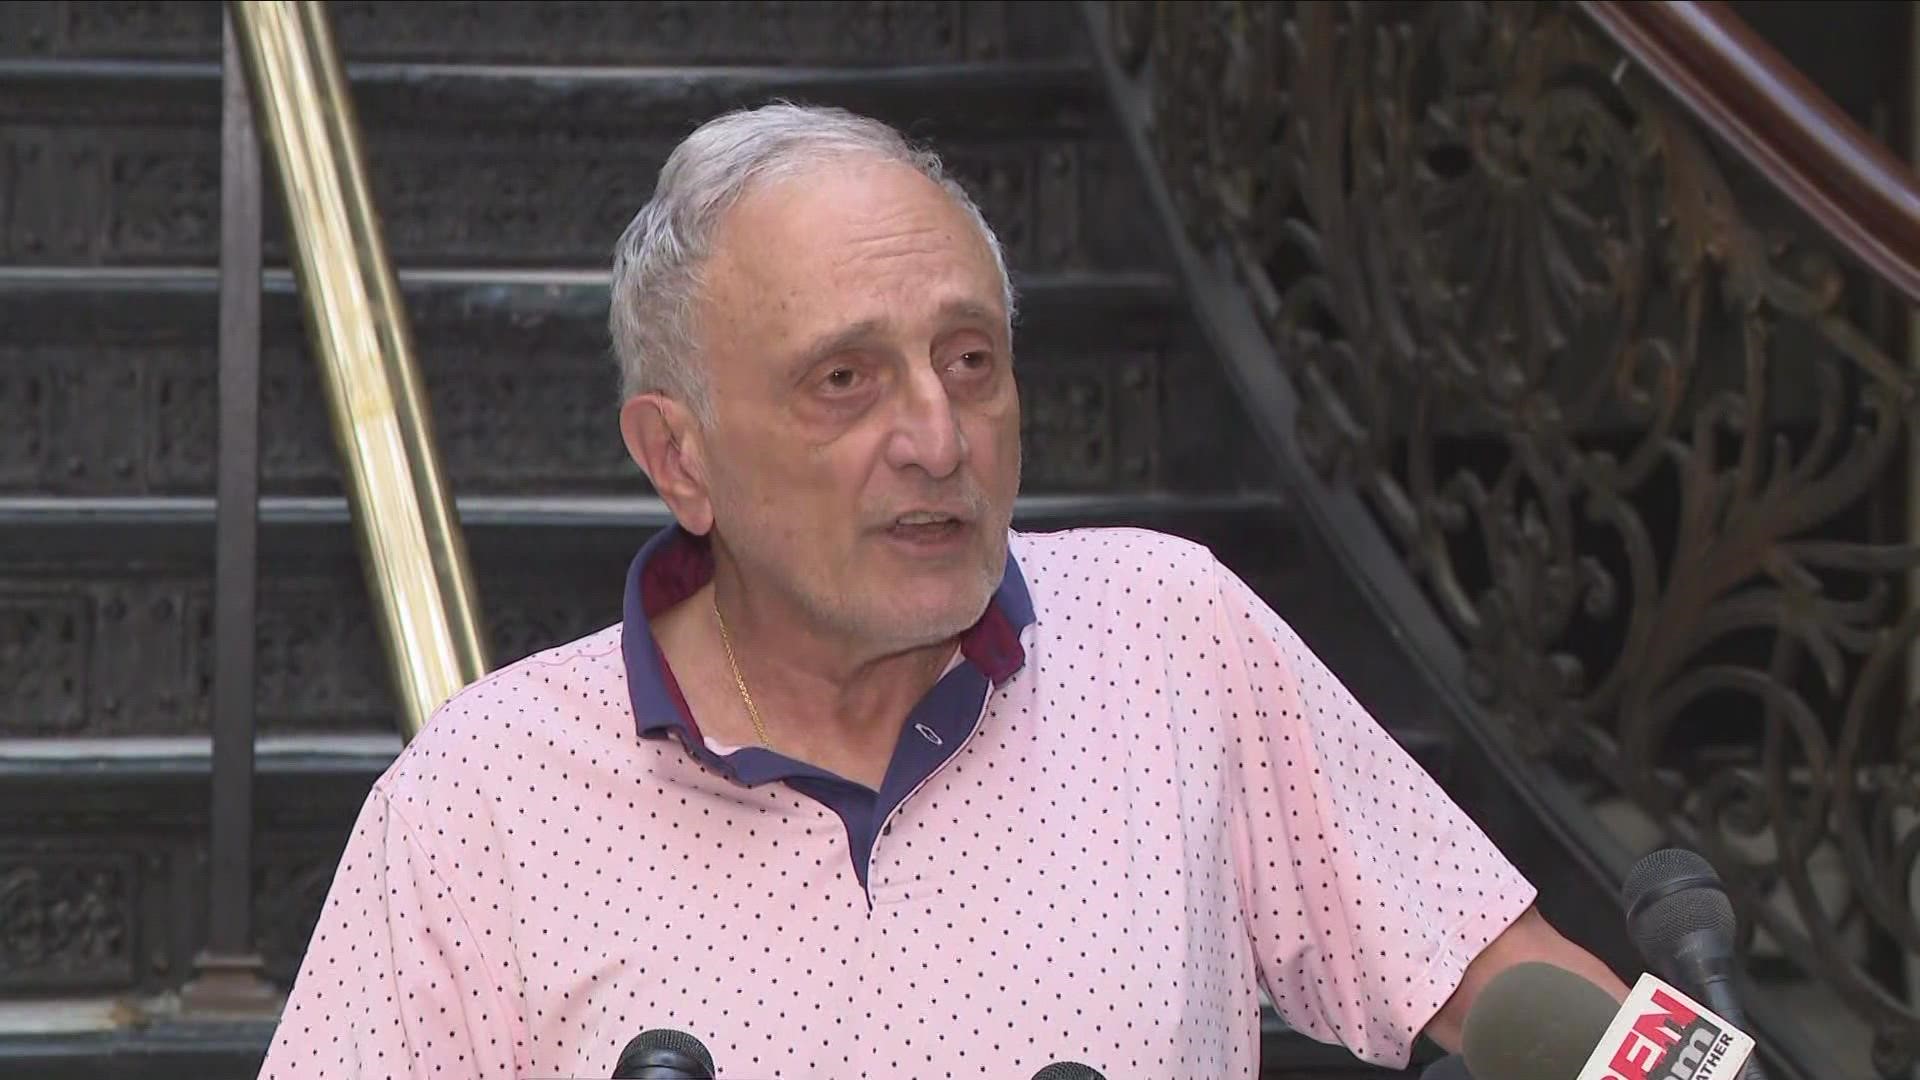 After weeks of avoiding interviews, Carl Paladino says his campaign is strong, well-funded, and leading.